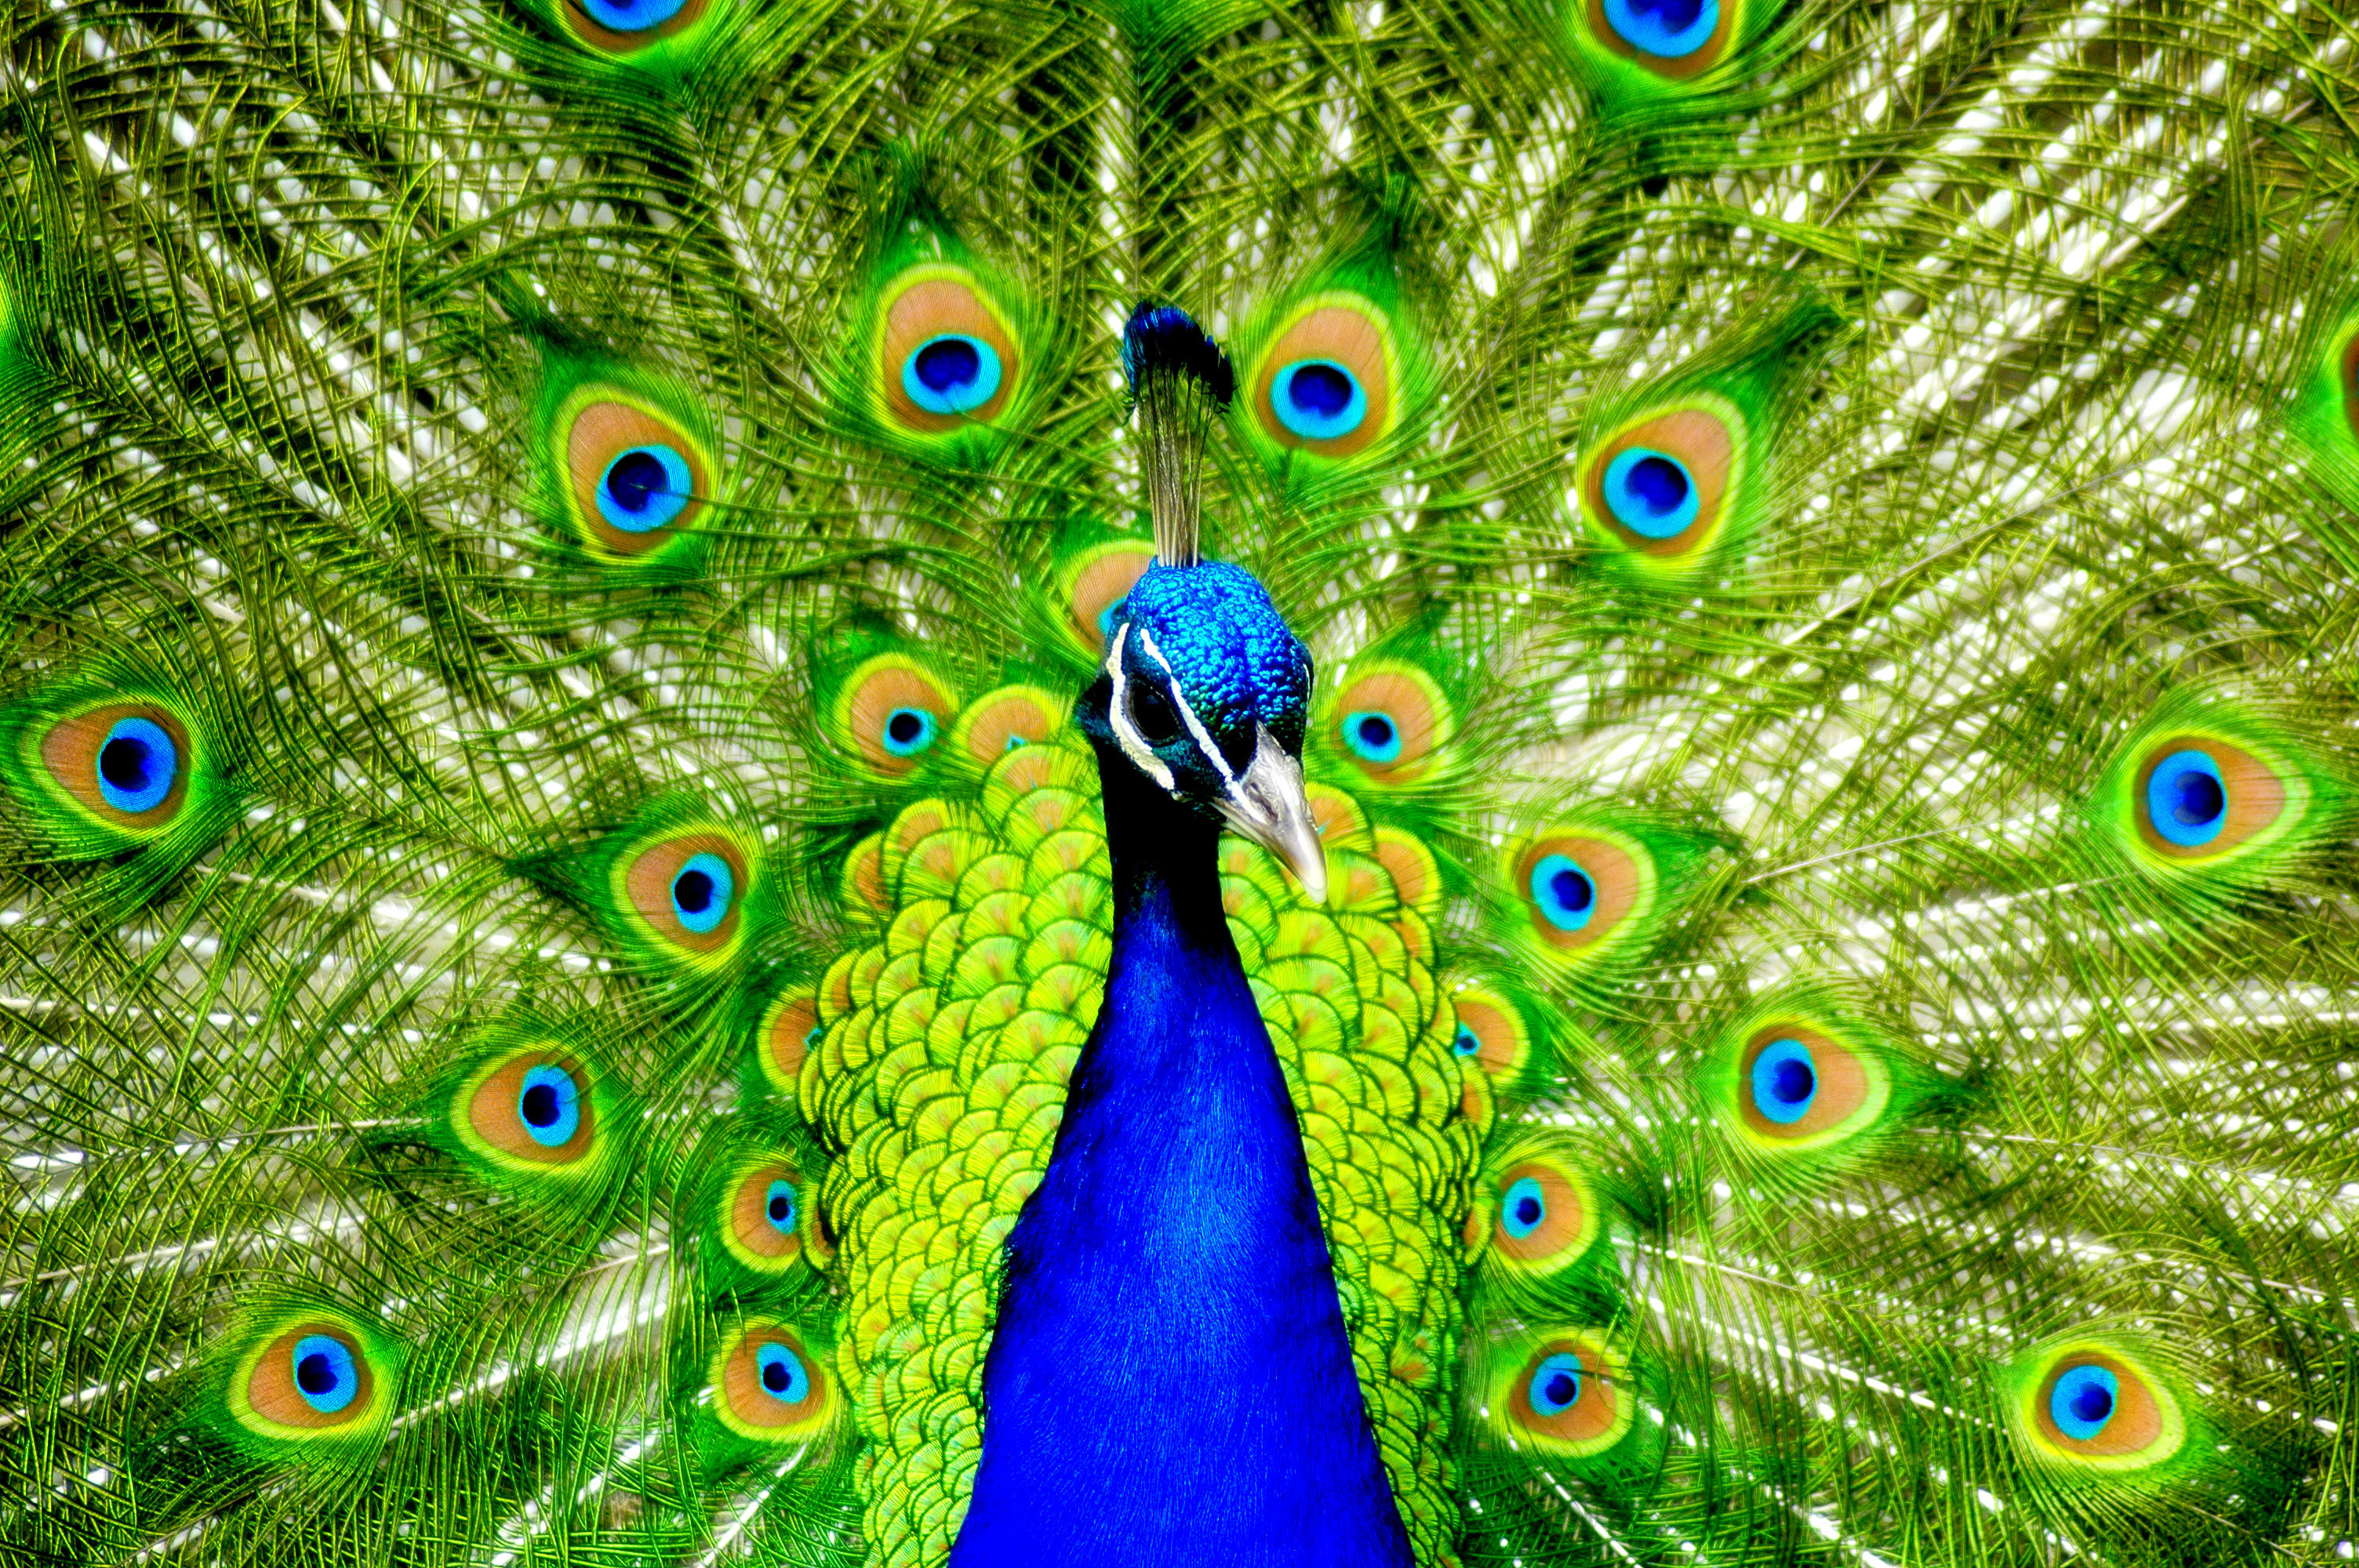 4k Peacock Wallpapers High Quality Download Free